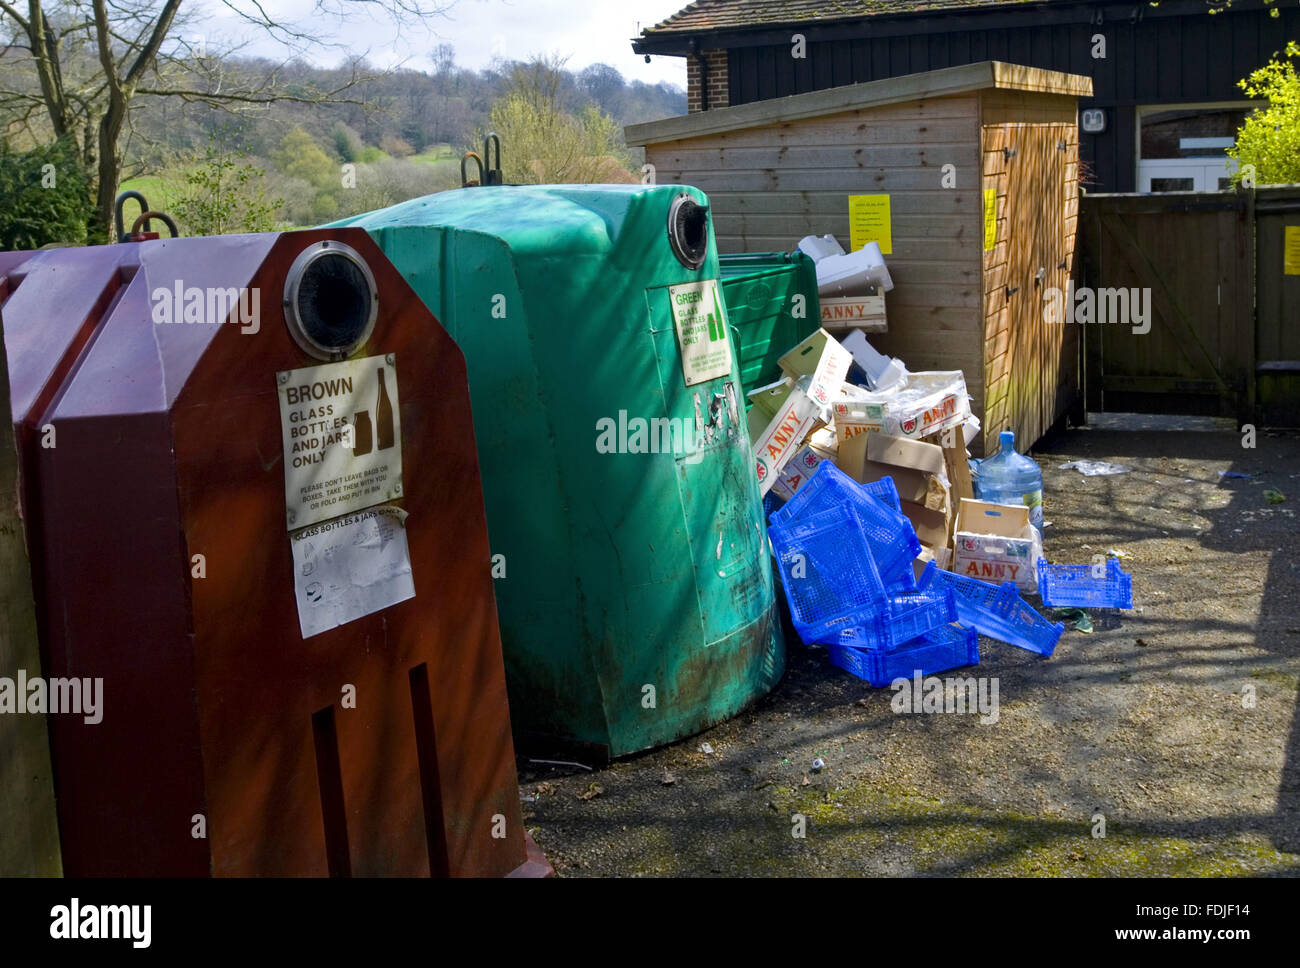 Recycling bins at Chartwell, Kent. Stock Photo